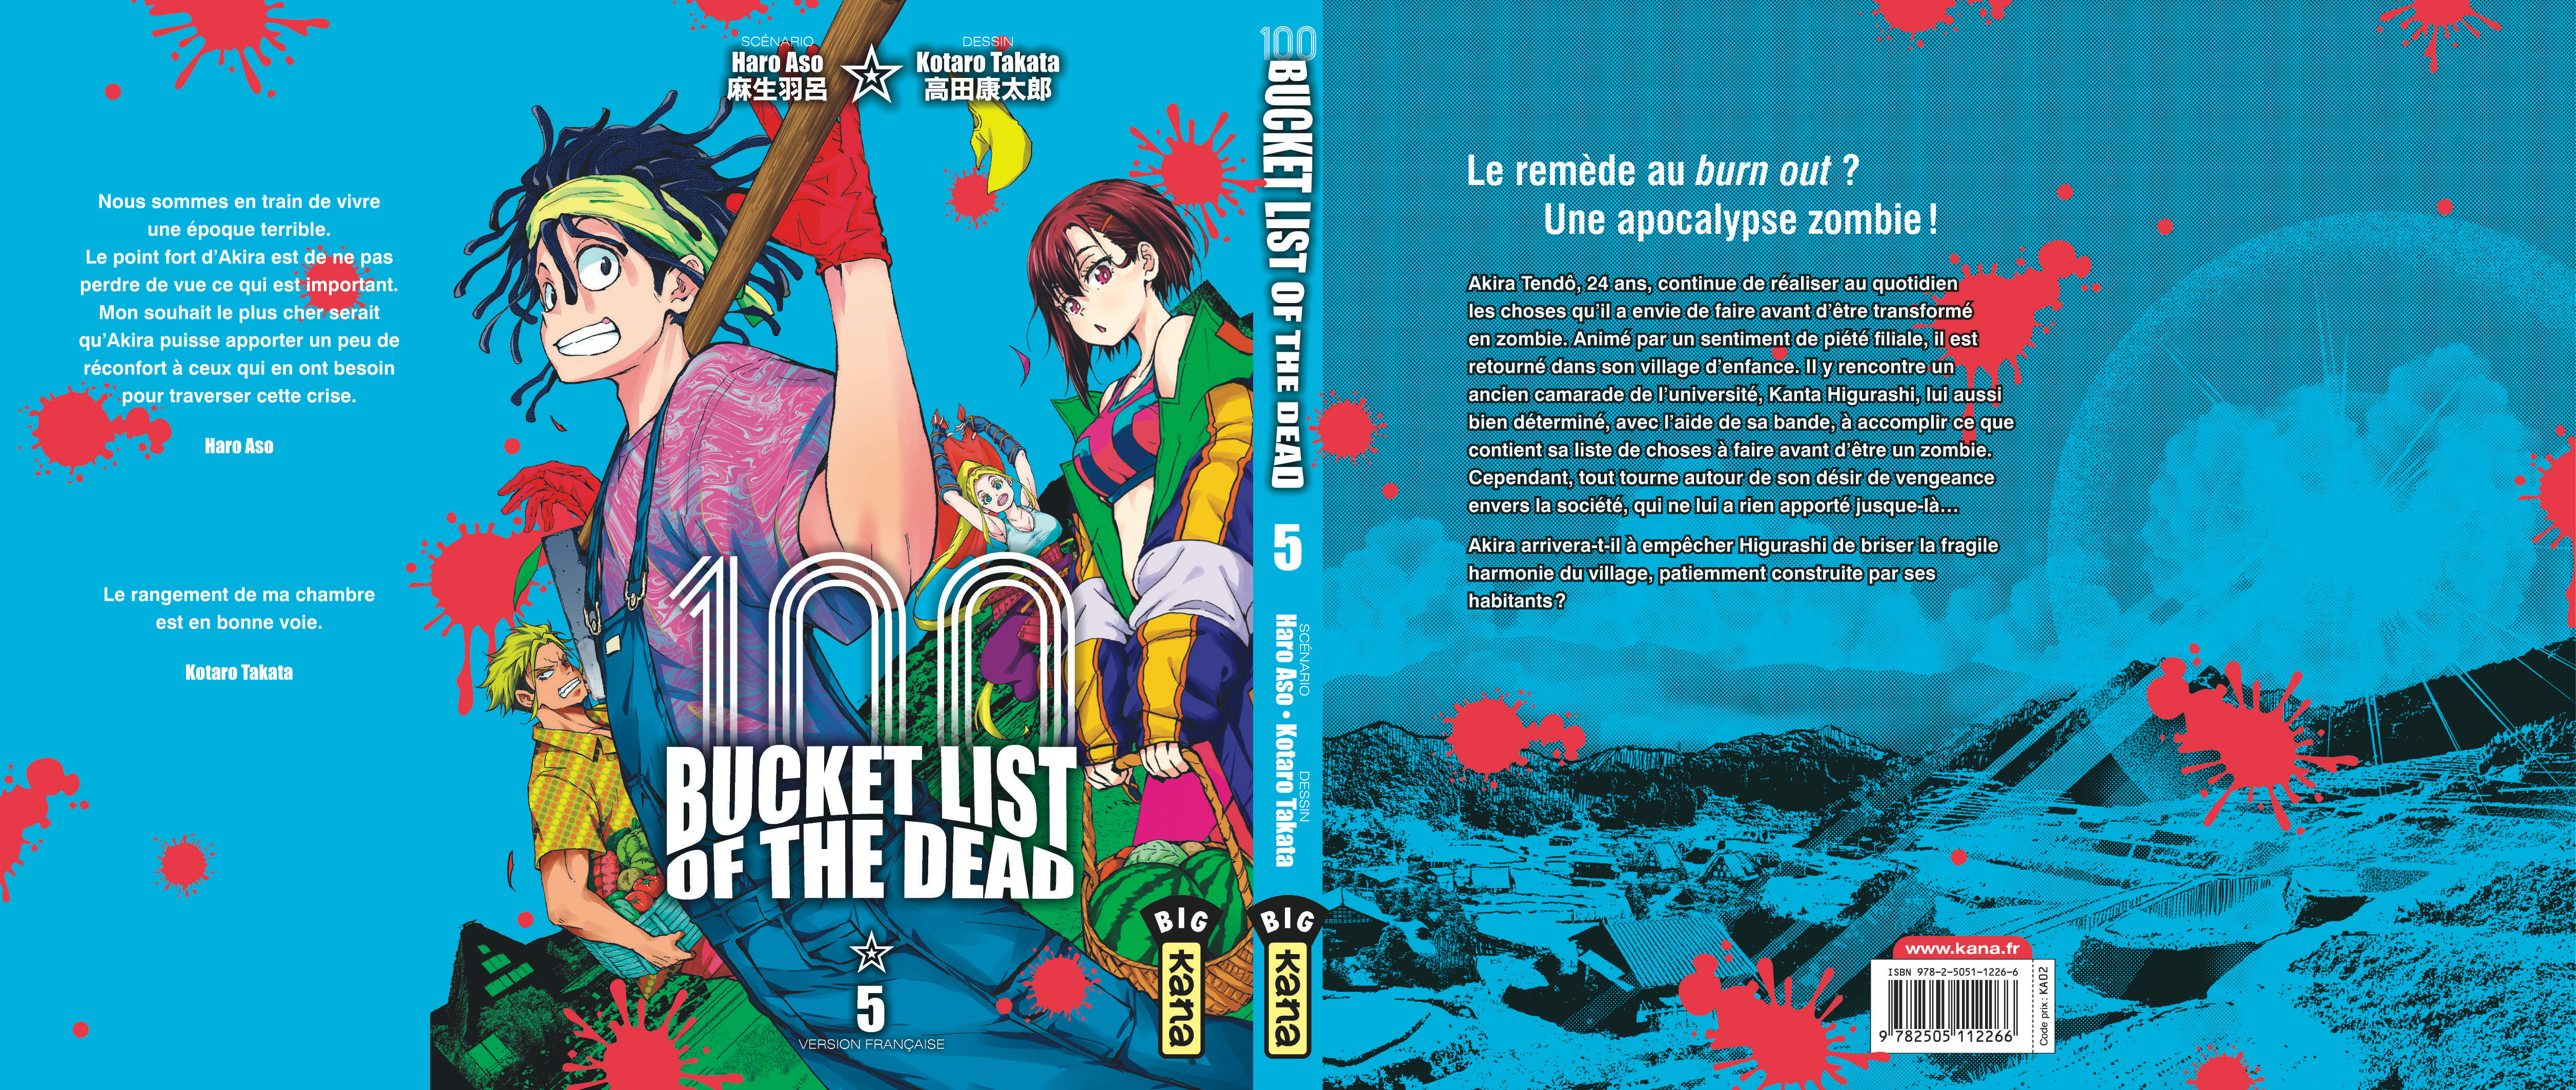 Bucket List of the dead – Tome 5 - 4eme